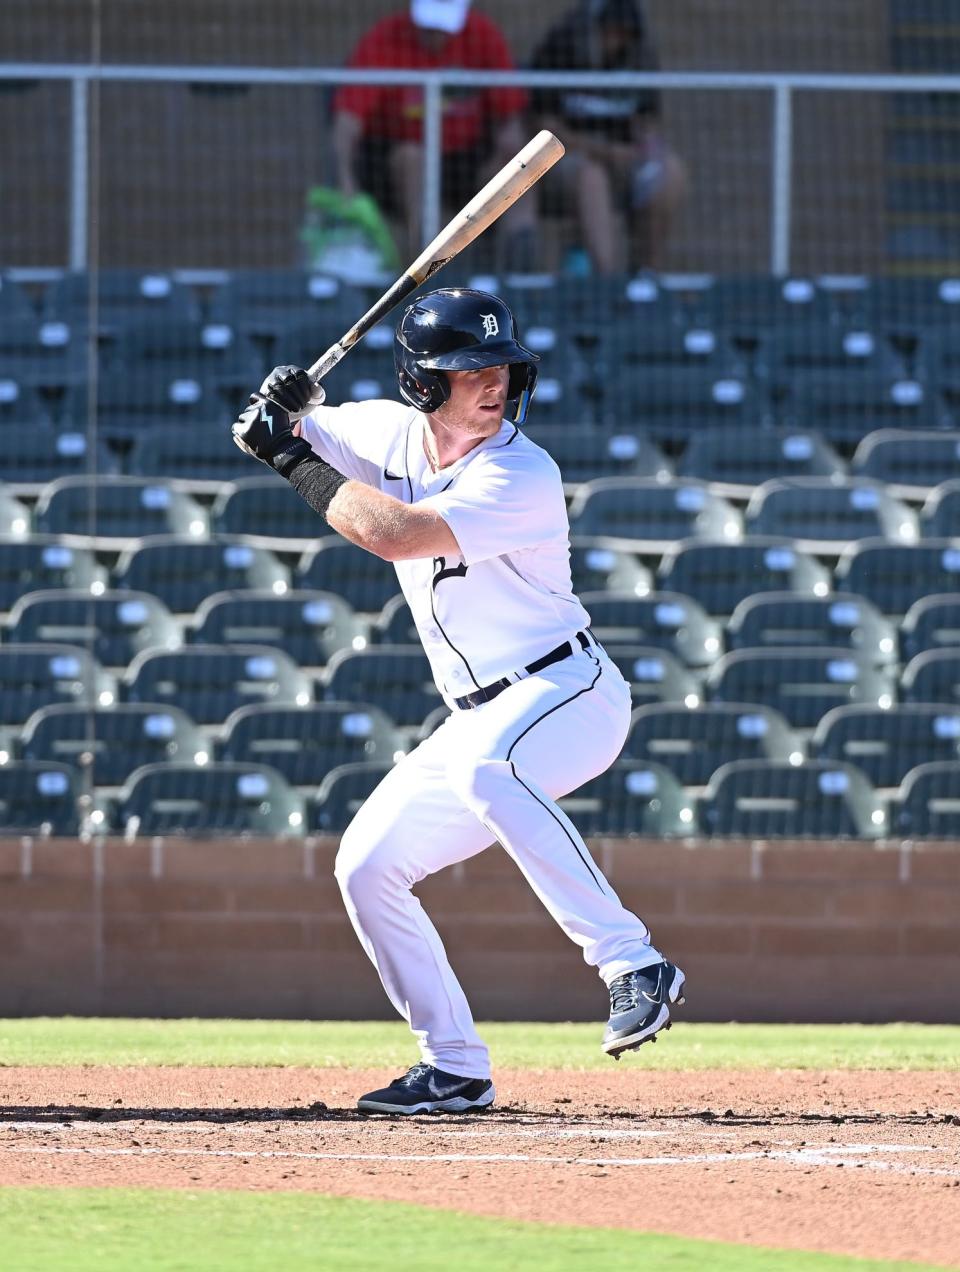 Detroit Tigers outfielder Justice Bigbie plays for the Salt River Rafters in the Arizona Fall League.